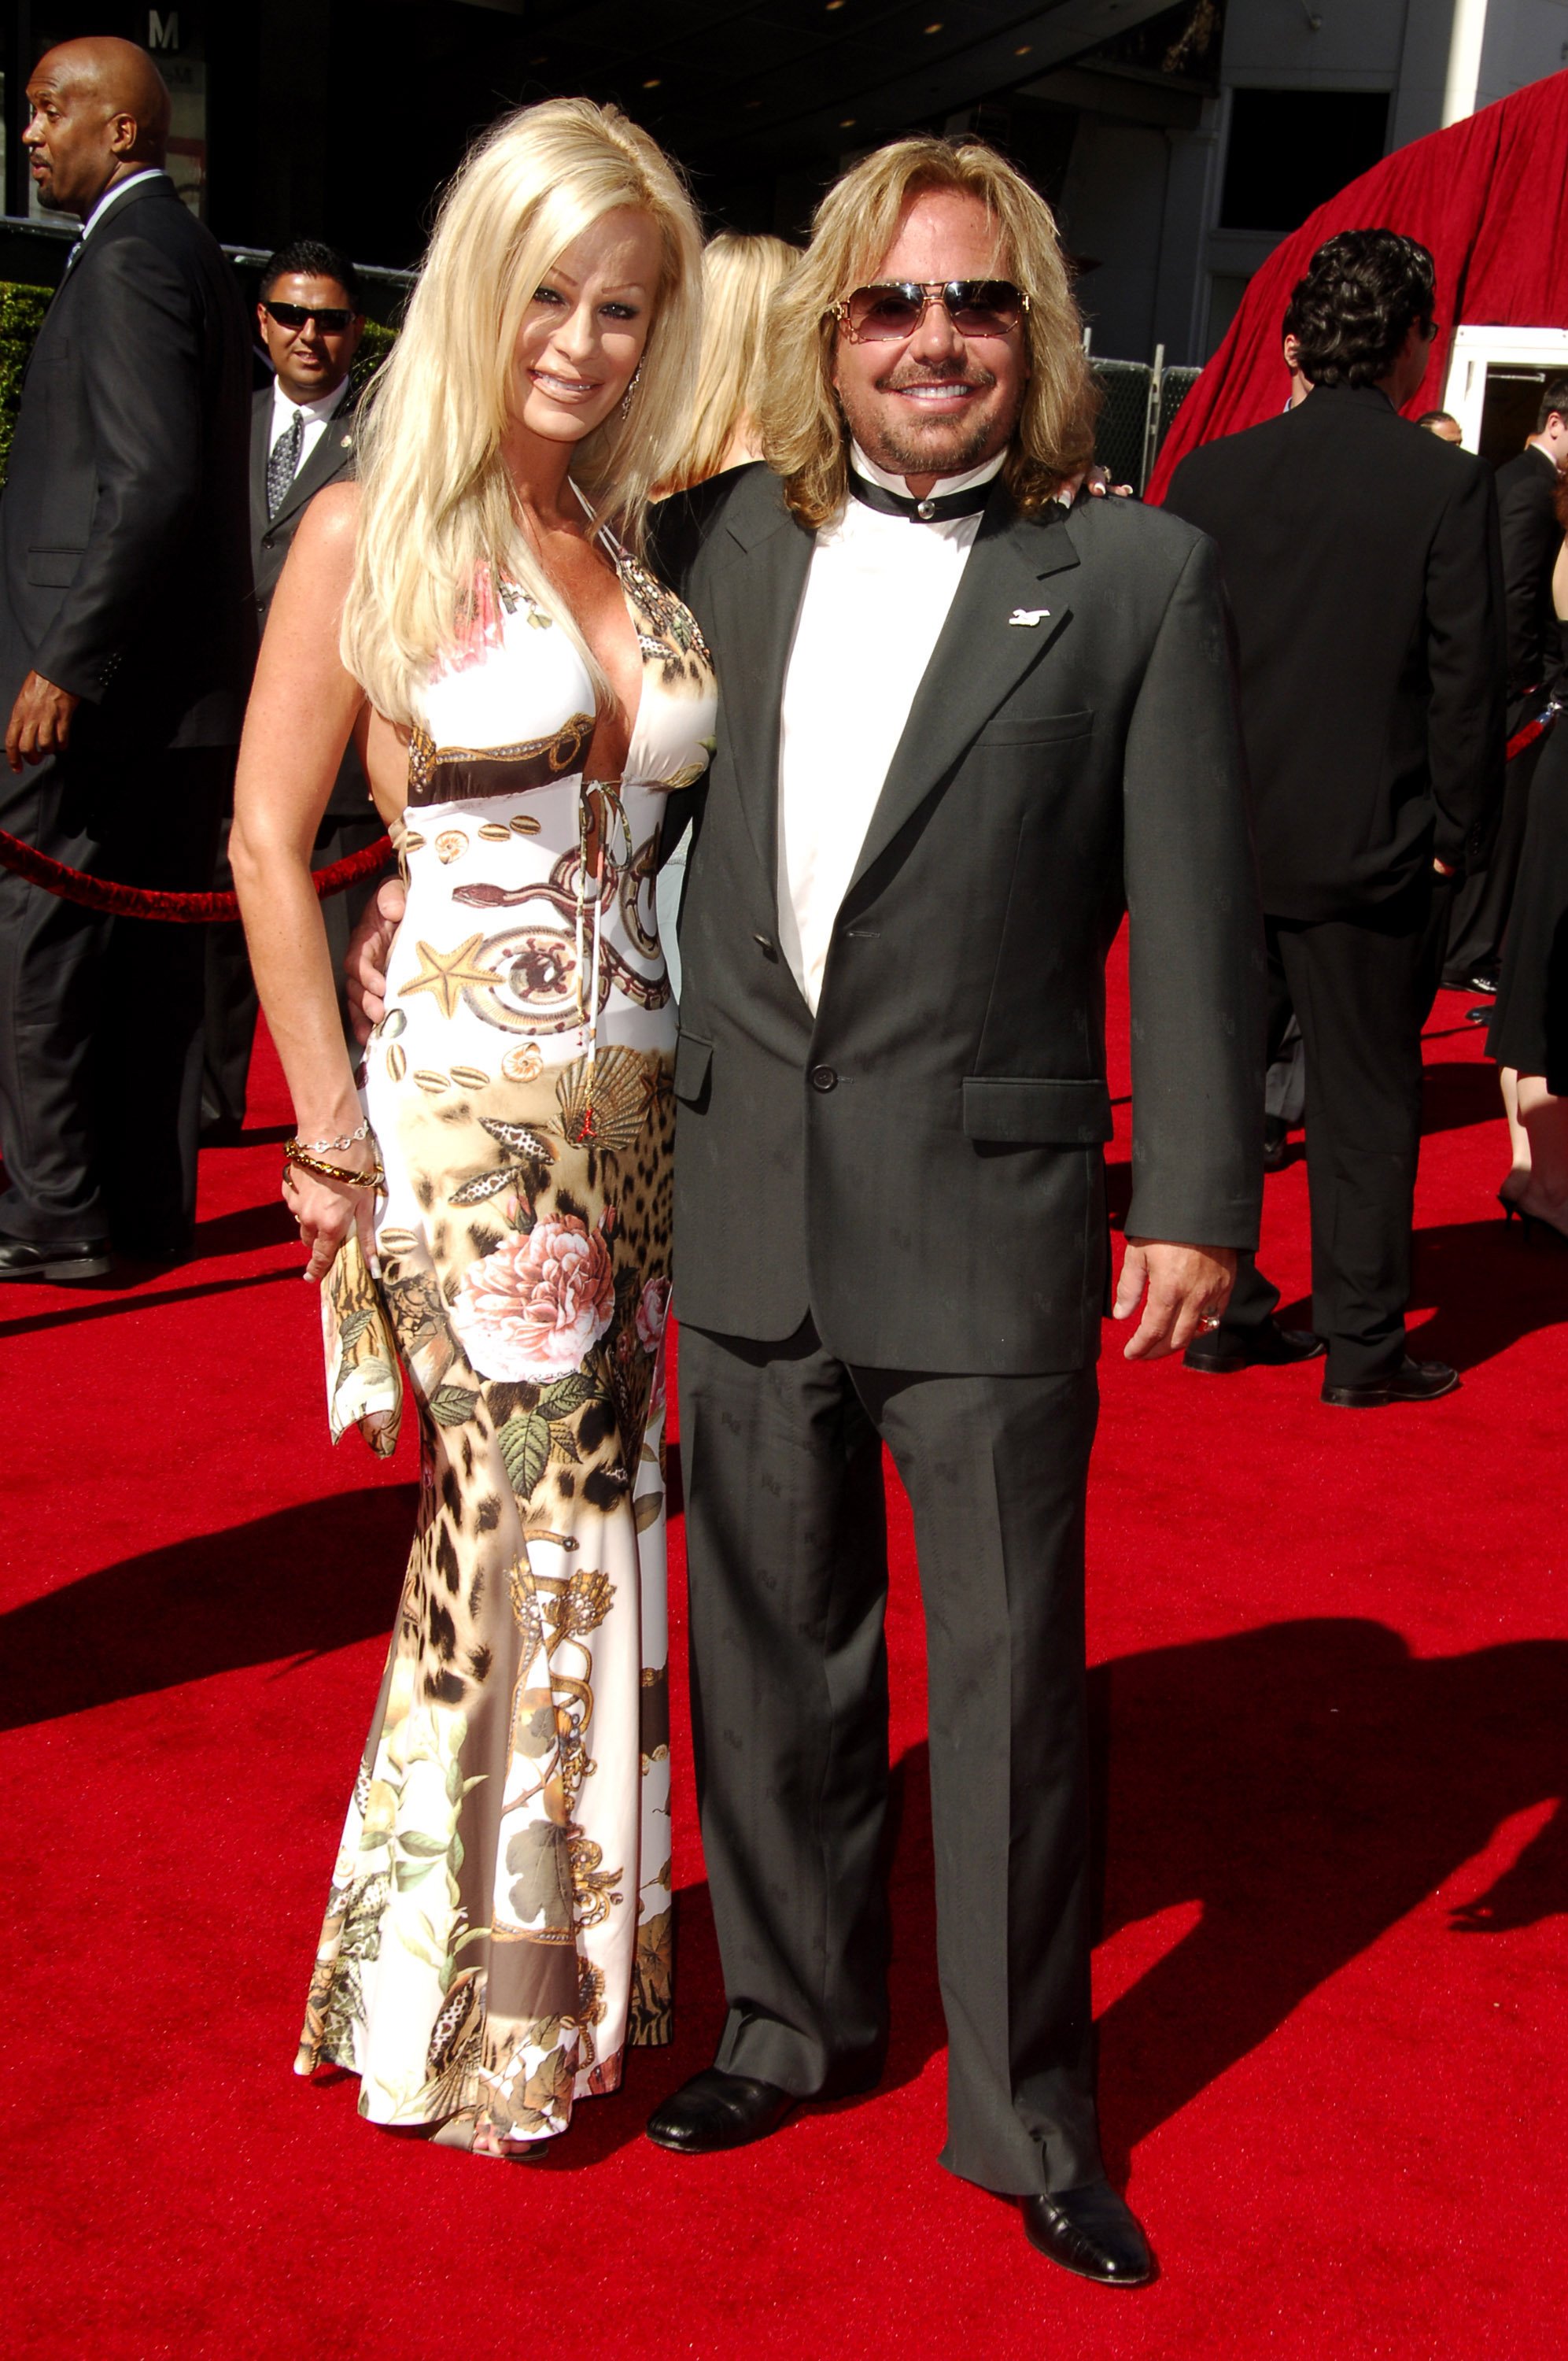 Vince Neil'S Was Married 4 Times: More About His Life